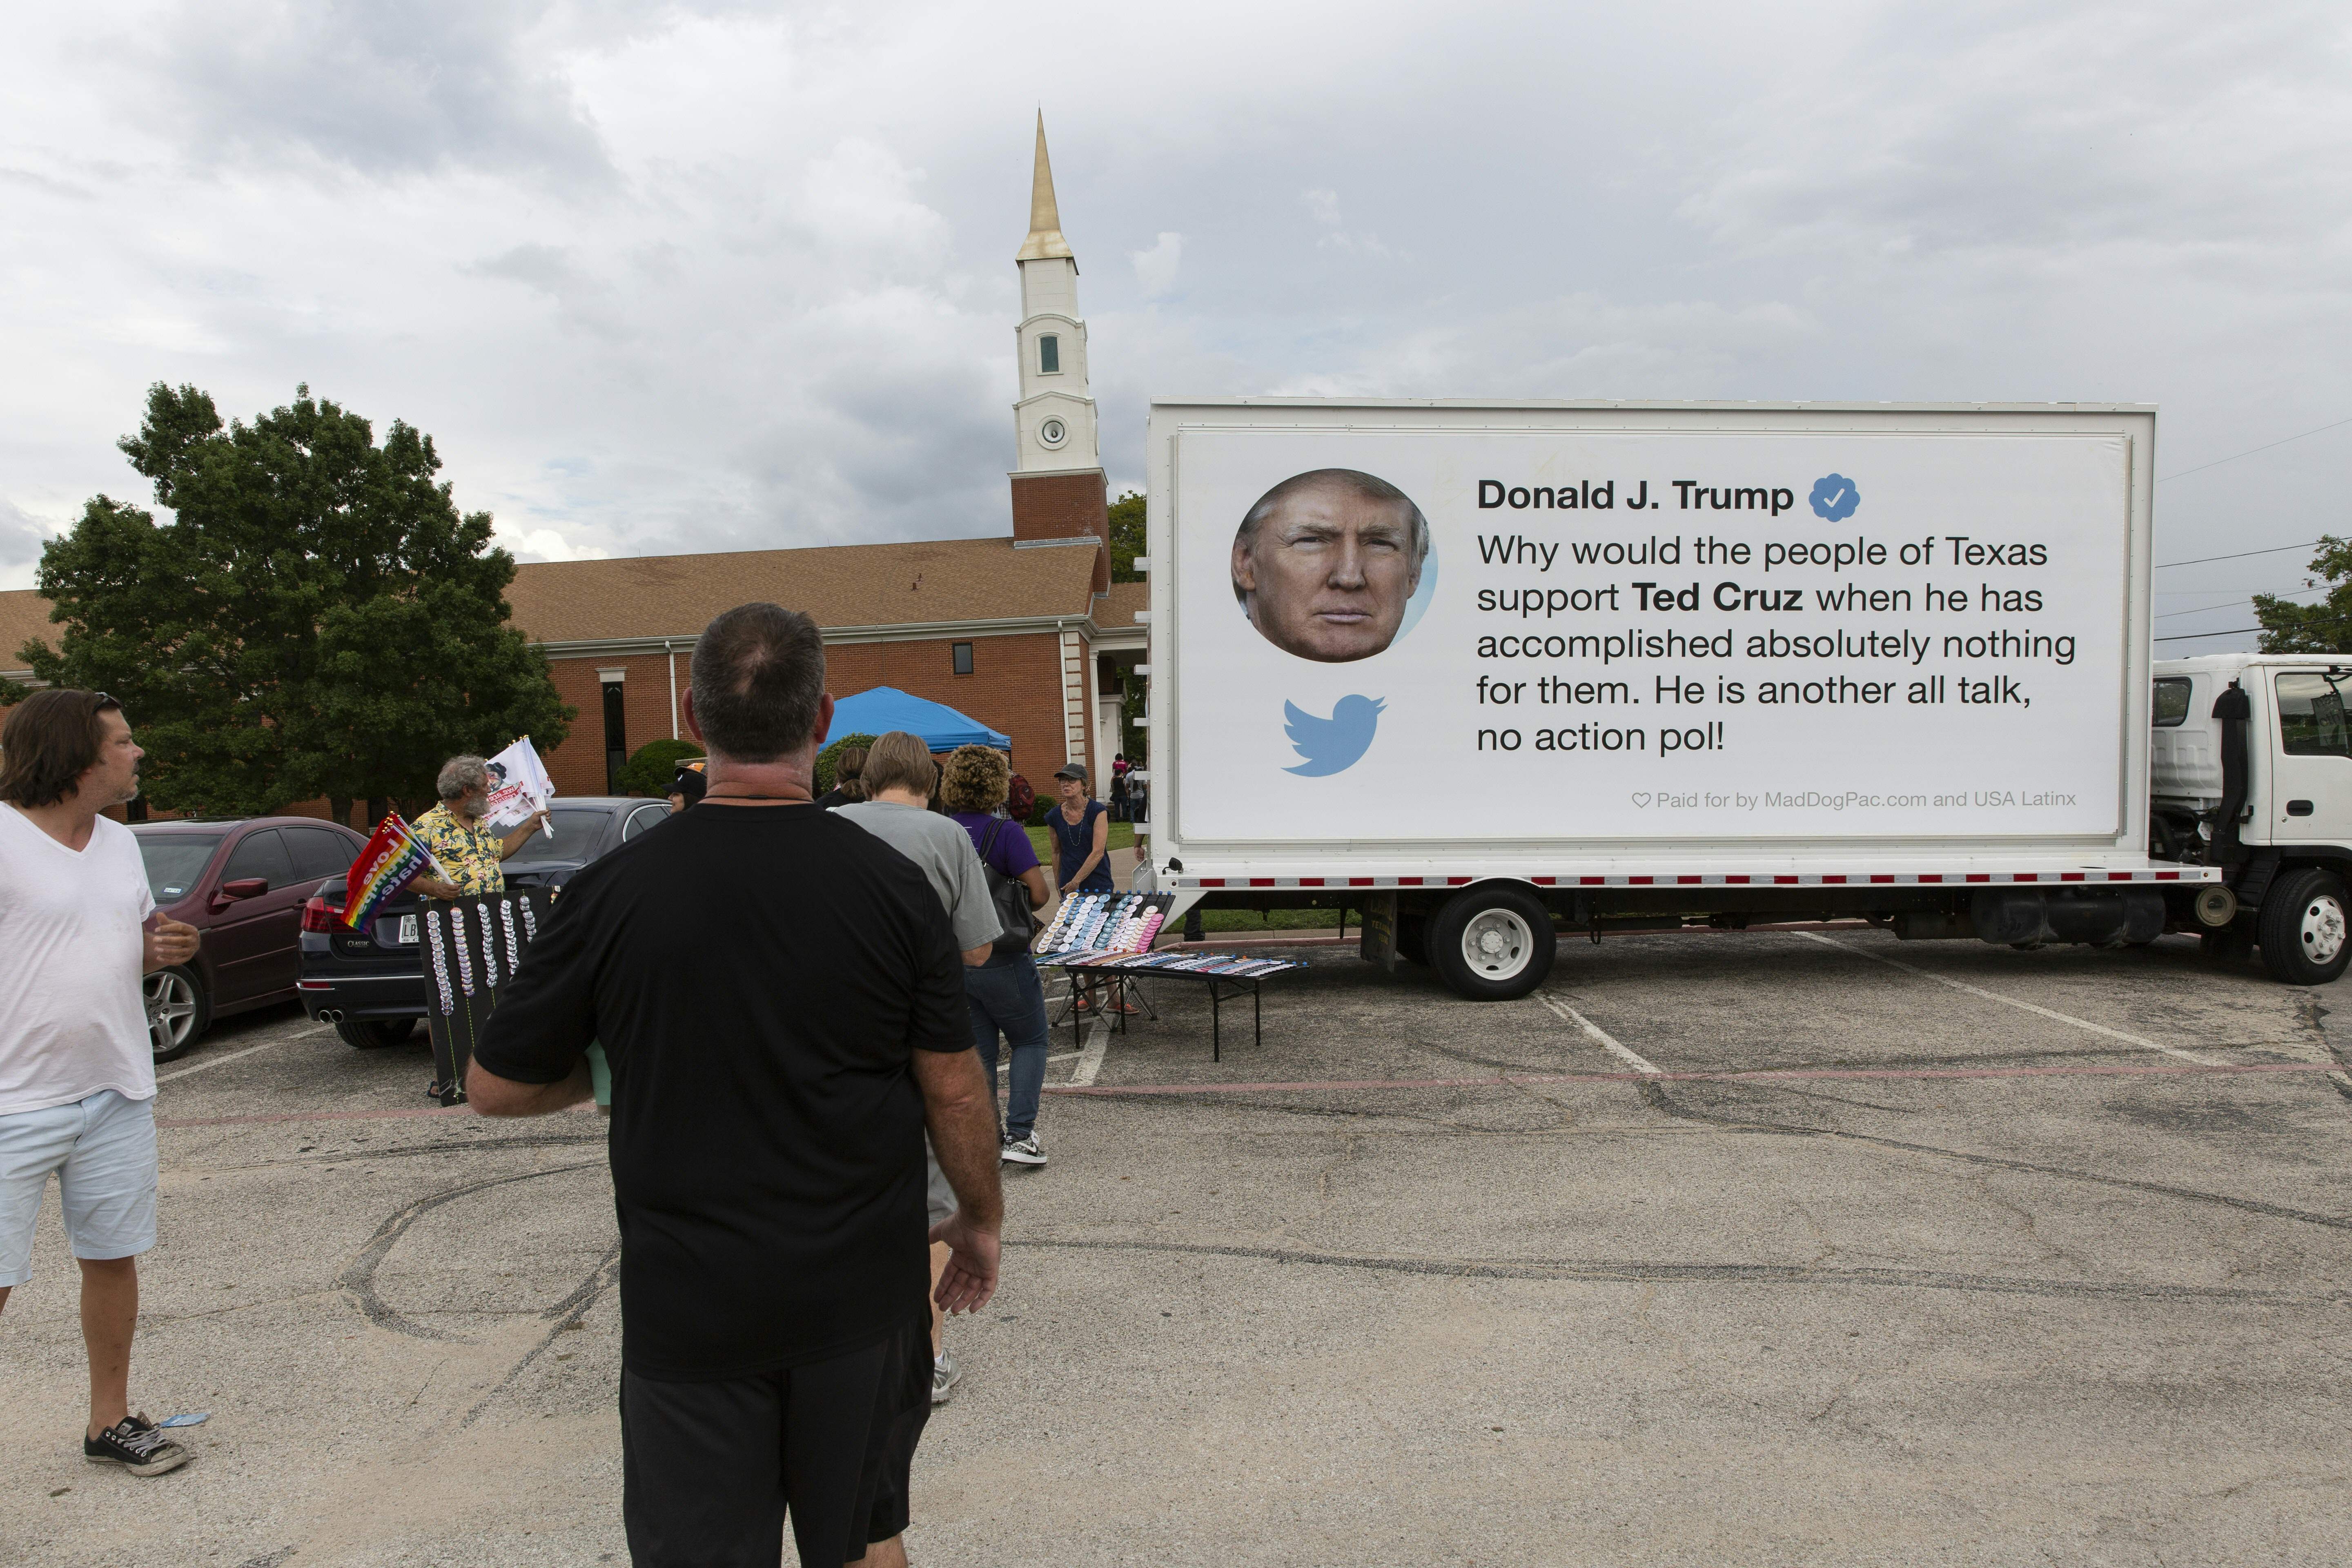 A billboard of a tweet by Pres. Donald Trump criticizing Sen. Ted Cruz stands outside a rally for U.S. Representative Beto O'Rourke (D-TX) in Dallas, Texas, on Sep. 14, 2018. - O'Rourke is the Democratic challenger for the U.S. Senate seat currently held by U.S. Senator Ted Cruz (R-TX) (Photo by Laura Buckman / Laura Buckman/AFP / AFP) (Photo credit should read LAURA BUCKMAN/AFP/Getty Images)